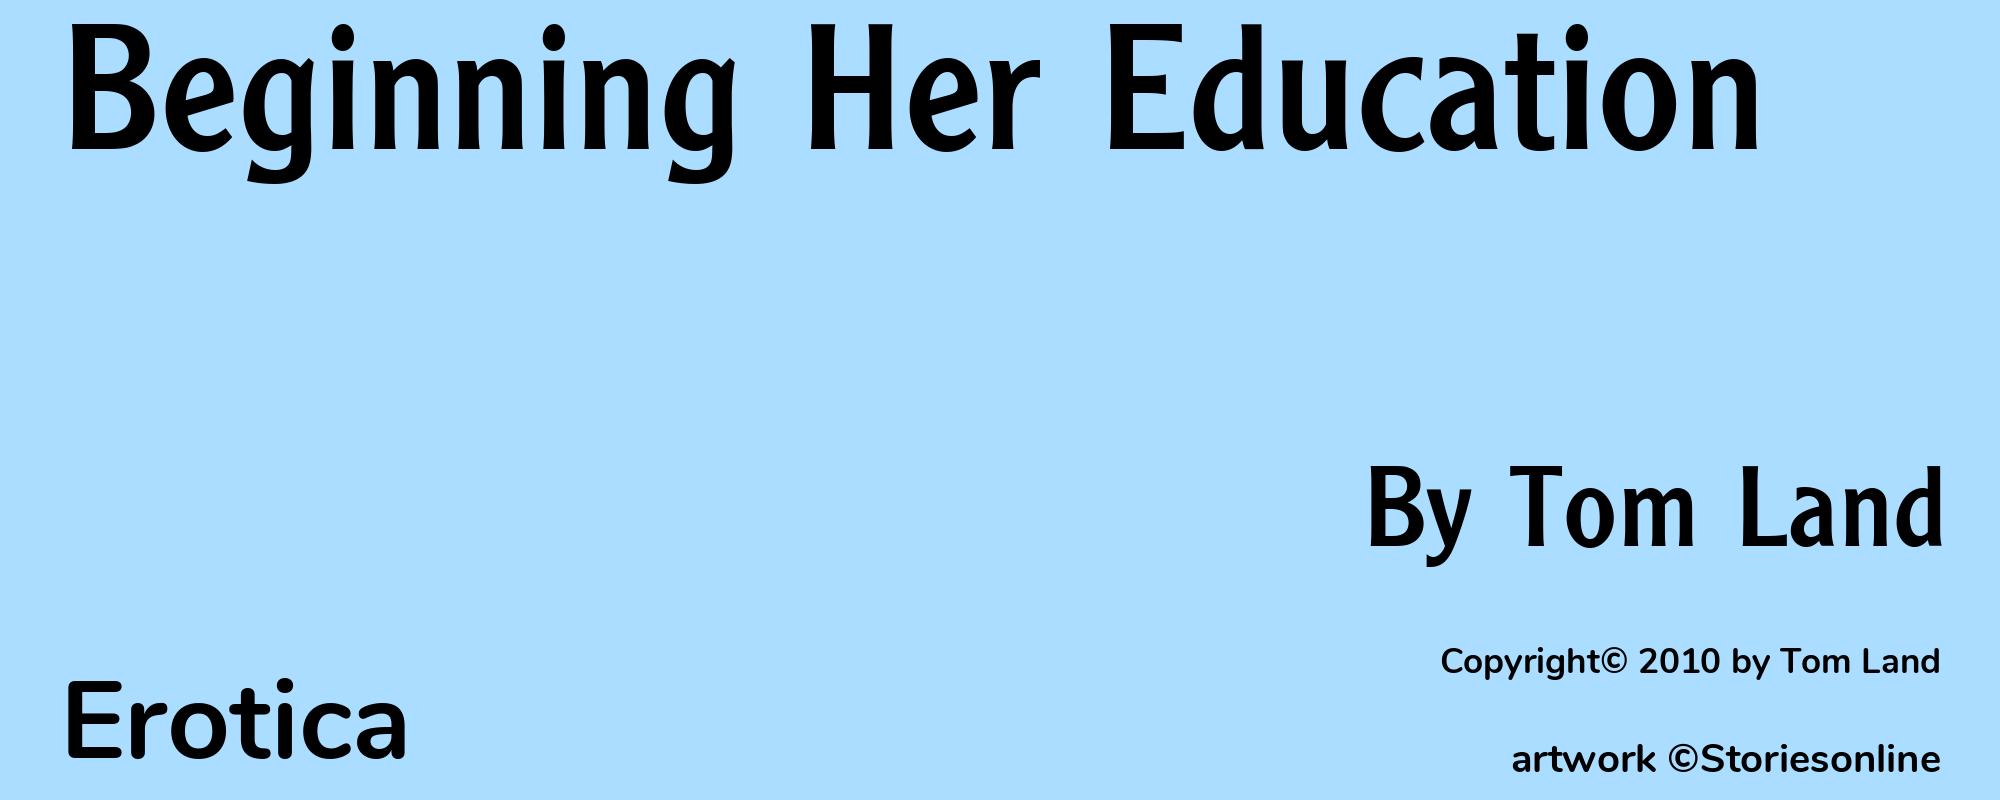 Beginning Her Education - Cover